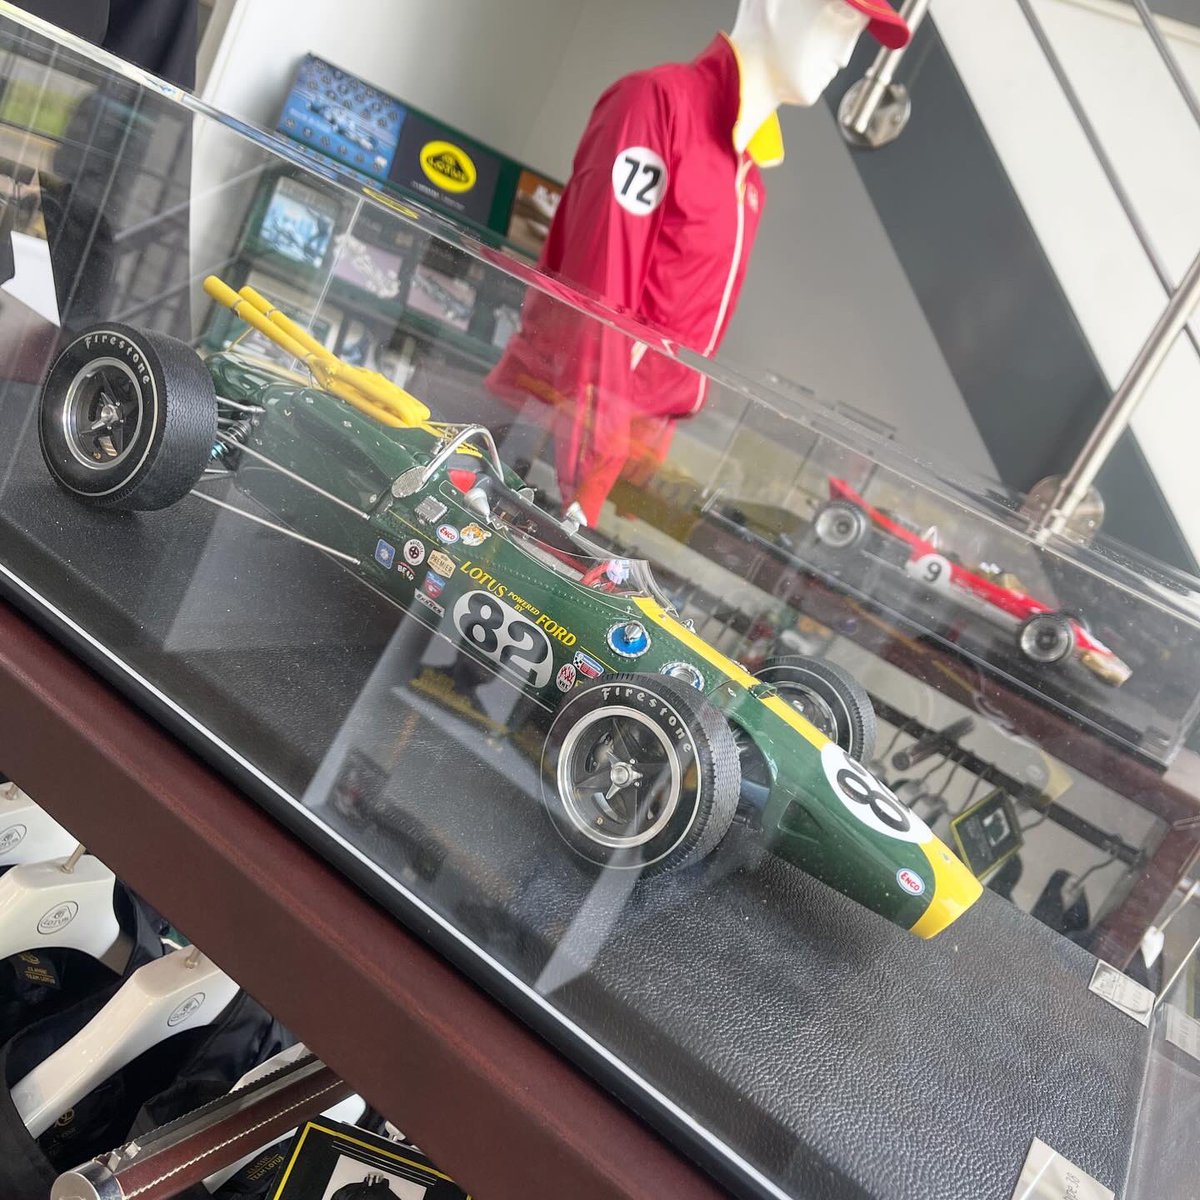 Went to the East side of England today, exited via Classic Team Lotus gift shop - Jim Bamber was one of my early influences of fun motorsport artwork, this #Senna sculpture based on his ‘87 Lotus caricature is awesome. 
.
The @amalgamofficial & @Scalextric also lovely to see 😍